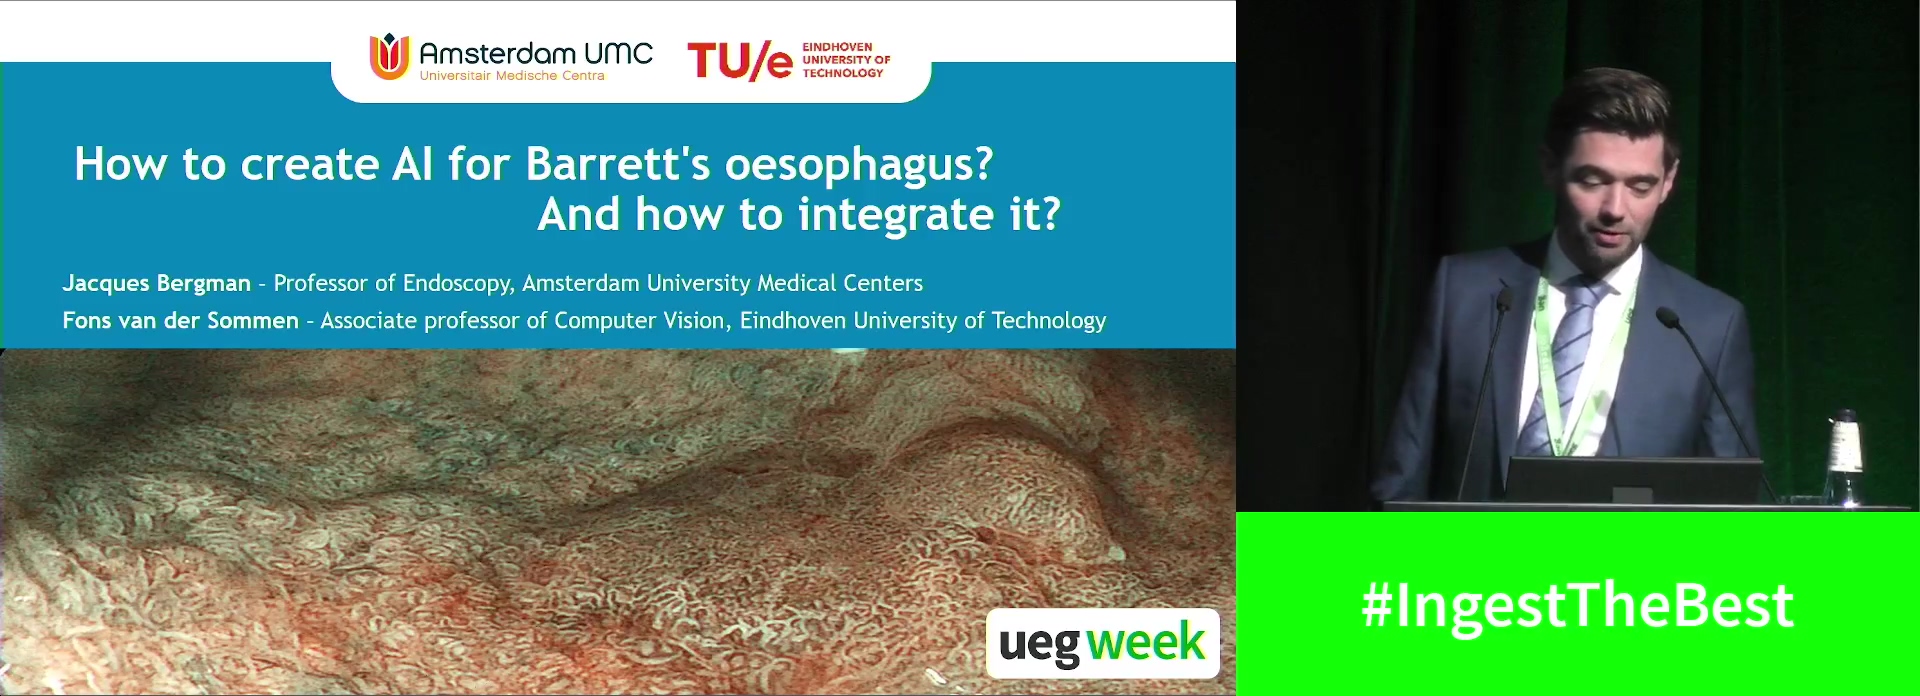 How to create AI for Barrett's oesophagus and how to integrate it in its management